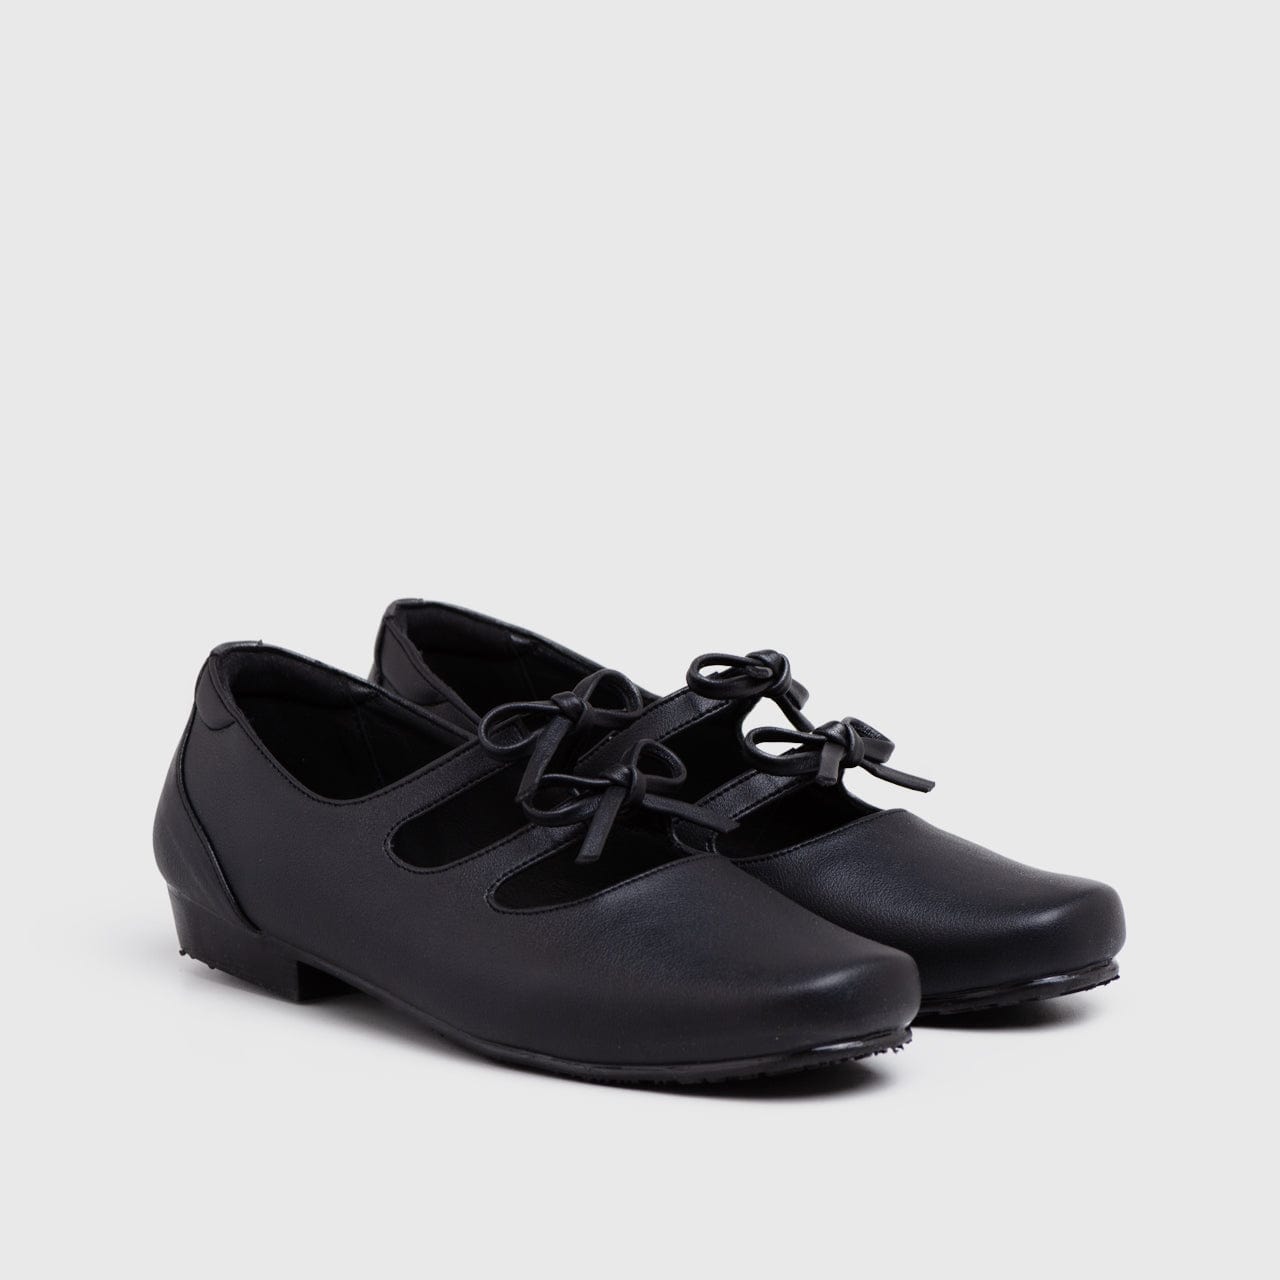 Adorable Projects Official Adorableprojects - Madison Flat Shoes Black